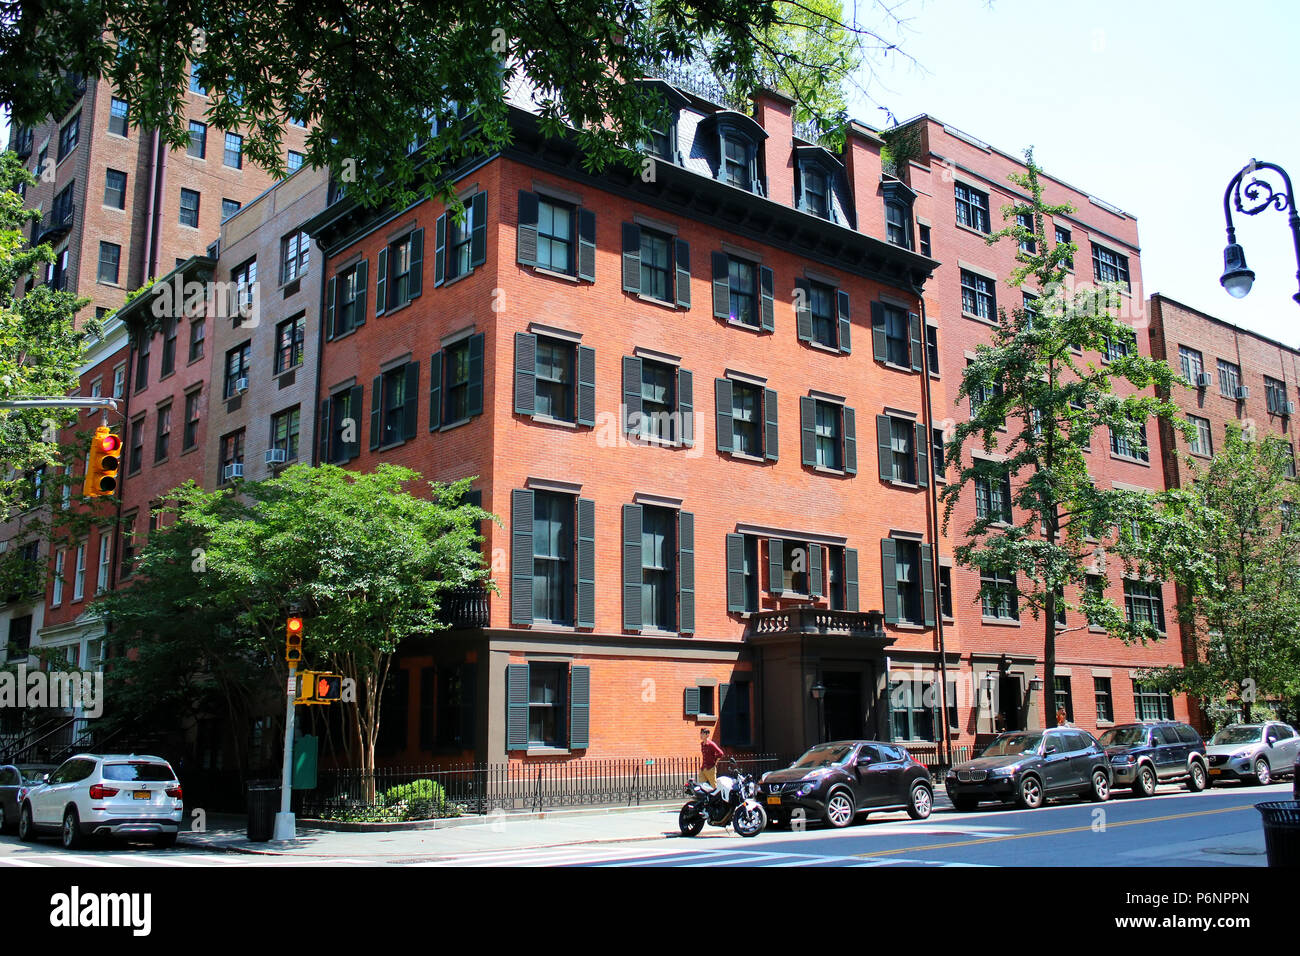 NEW YORK, NY - JUNE 22: Stuyvesant Fish House on the corner of Irving Place and Gramercy Park South, Gramercy Park Historic District, Manhattan on JUN Stock Photo